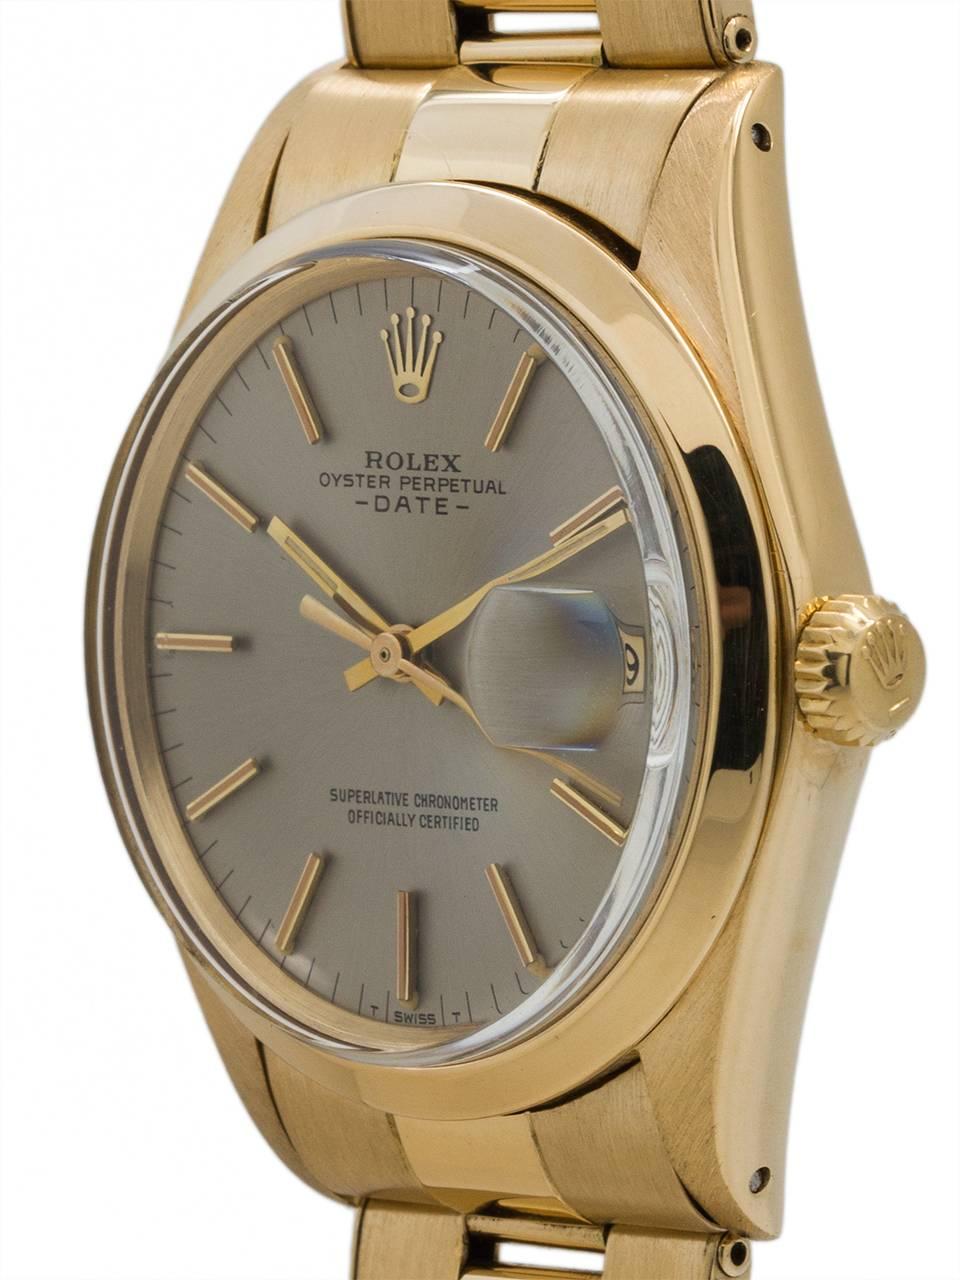 Rolex 18K YG Man’s Oyster Perpetual Date ref 1500 serial#1.7 million circa 1968.  Featuring a 34mm diameter  case with 14K YG smooth bezel with acrylic crystal and beautiful original silver satin dial with applied gold indexes and gilt hands.